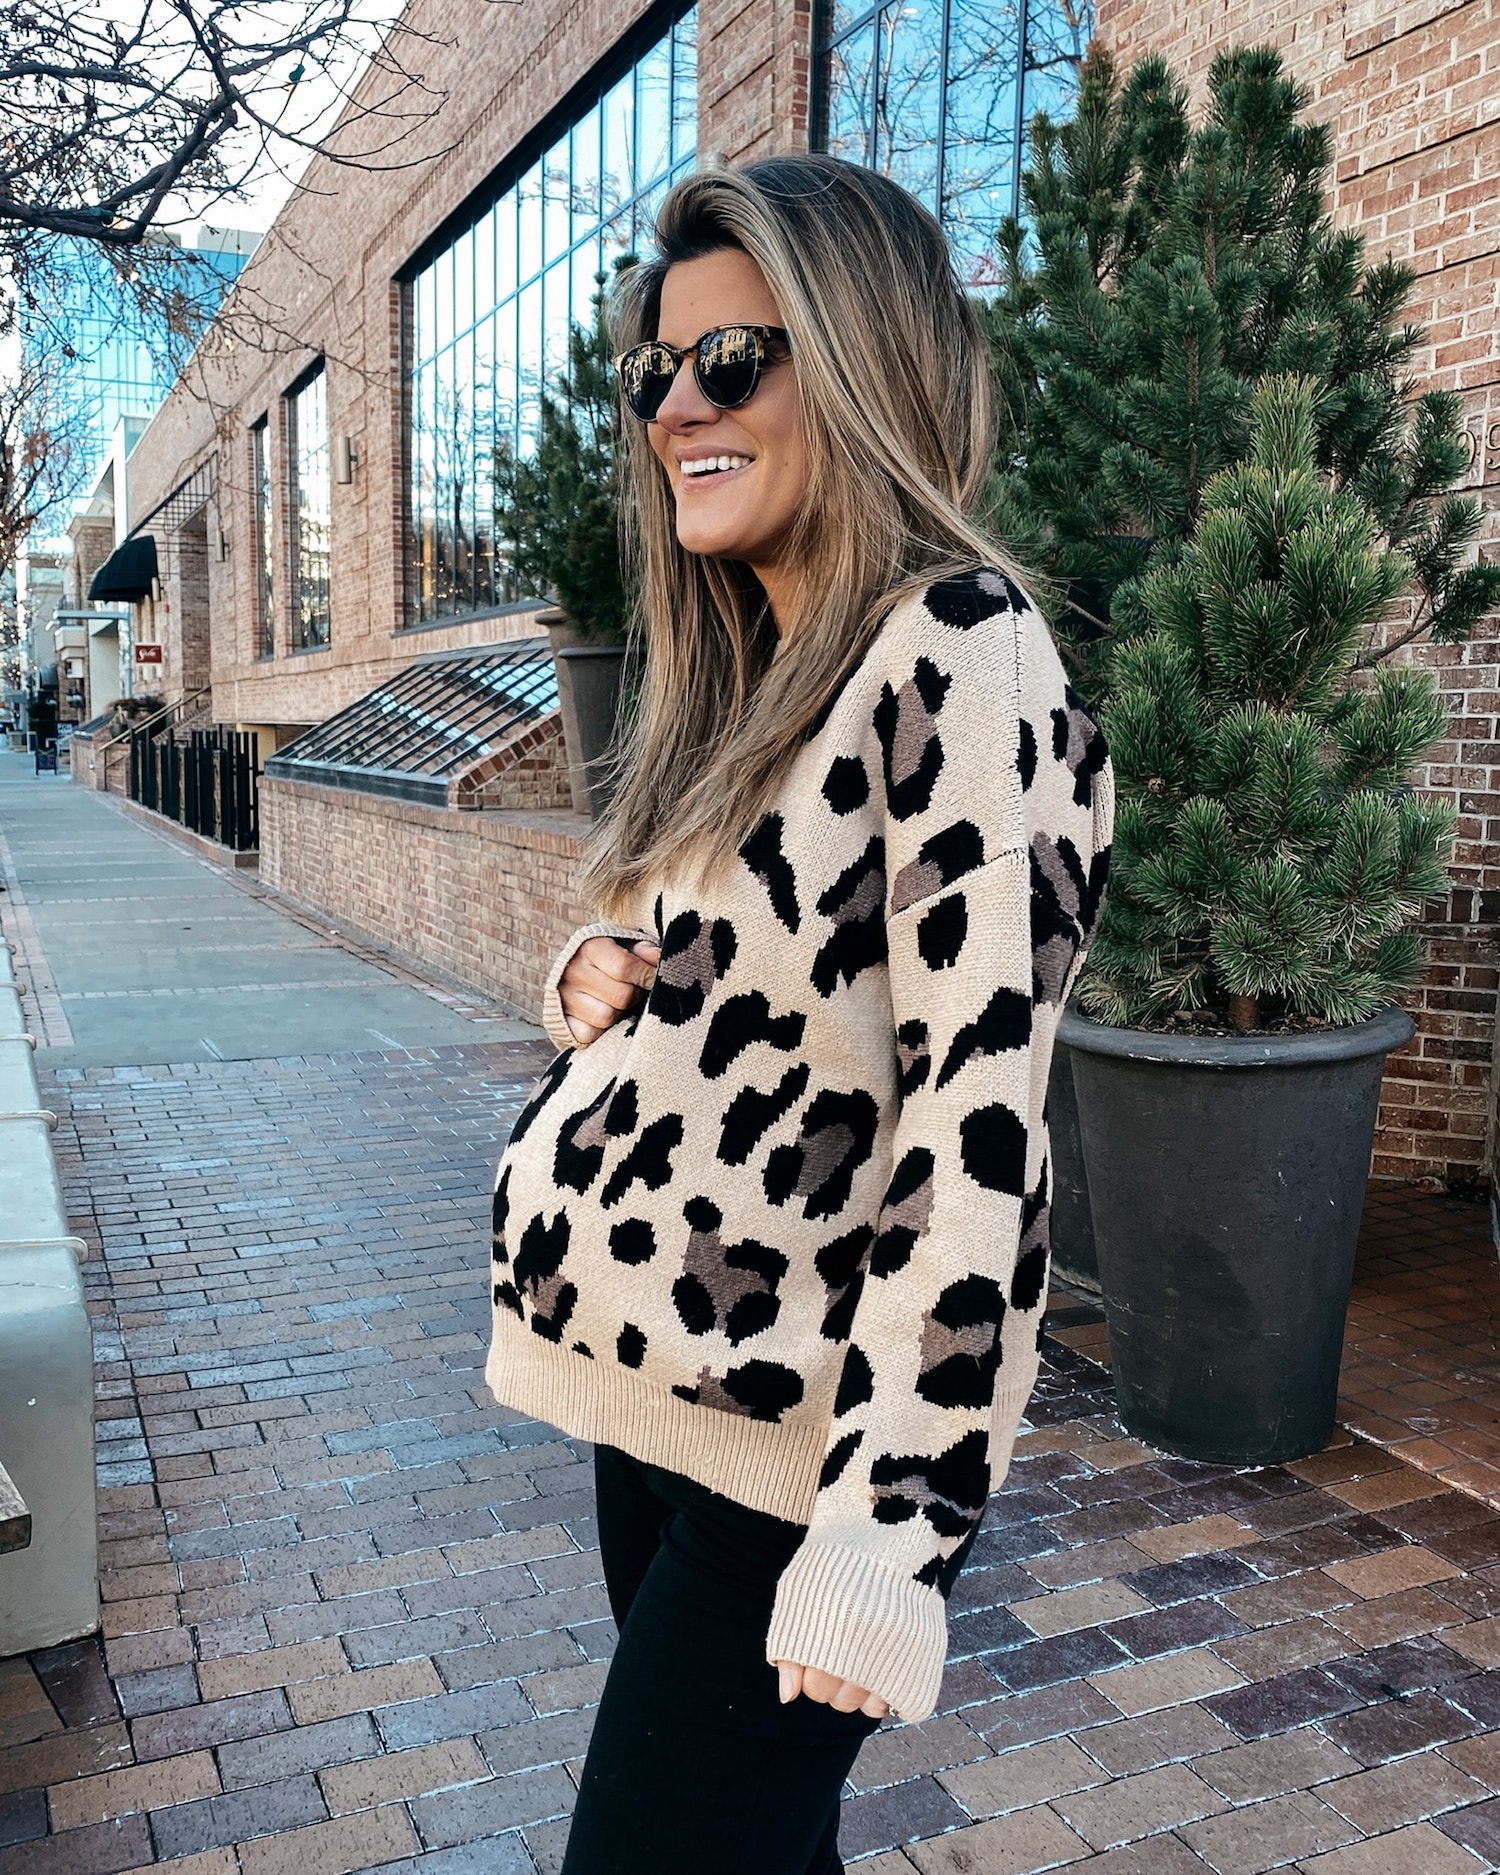 Brighton Butler in leopard sweater and black jeans, maternity fashion